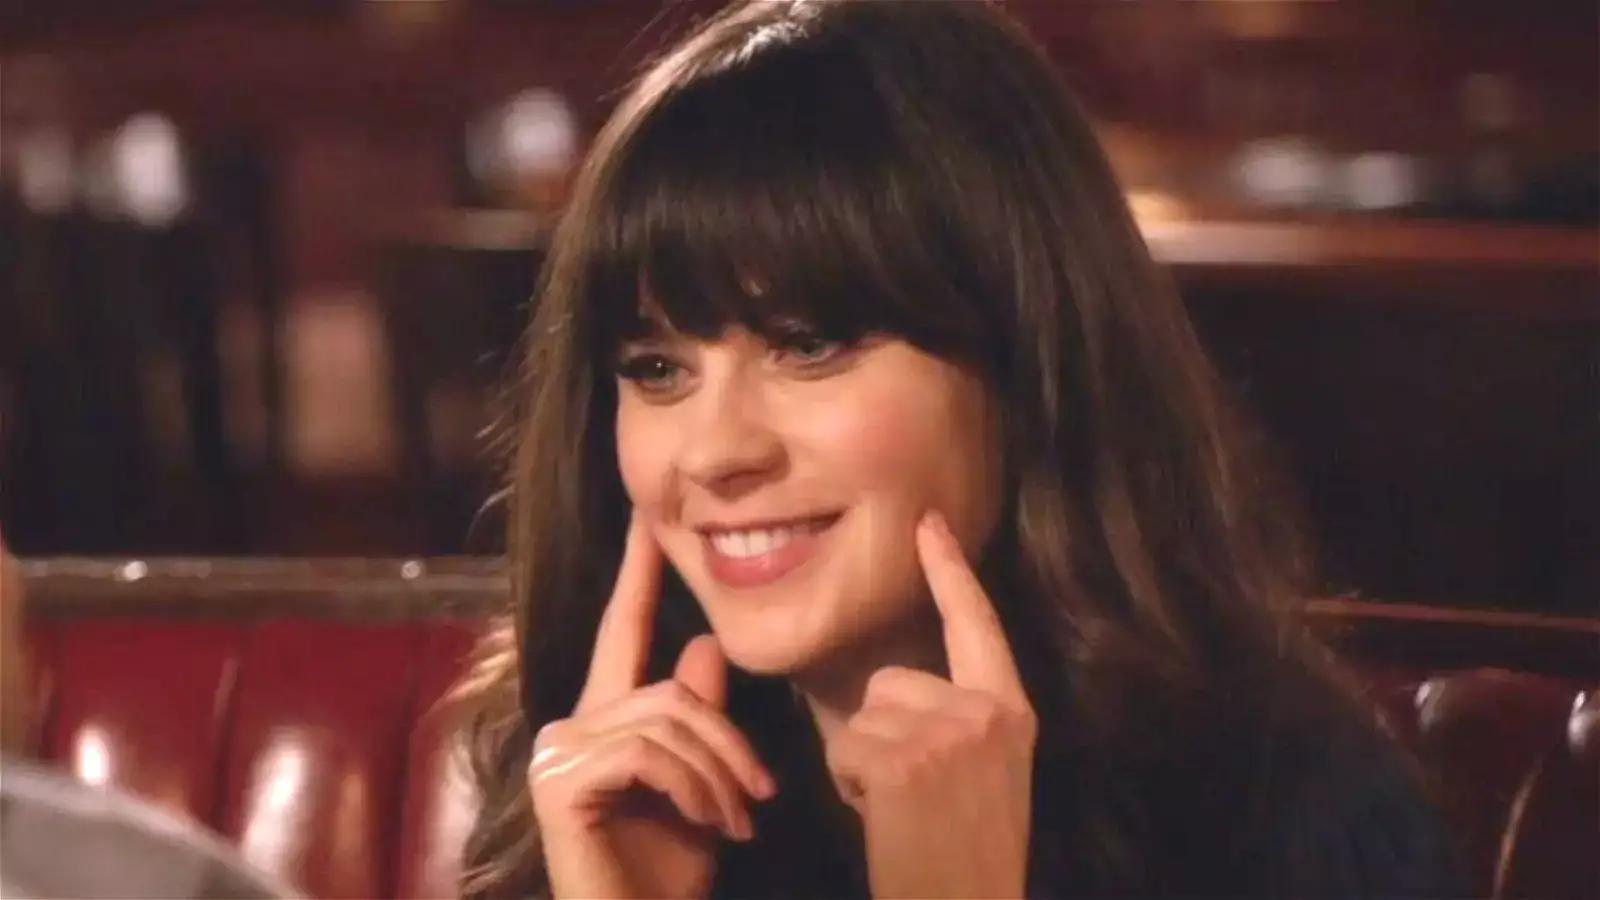 Jess from New Girl